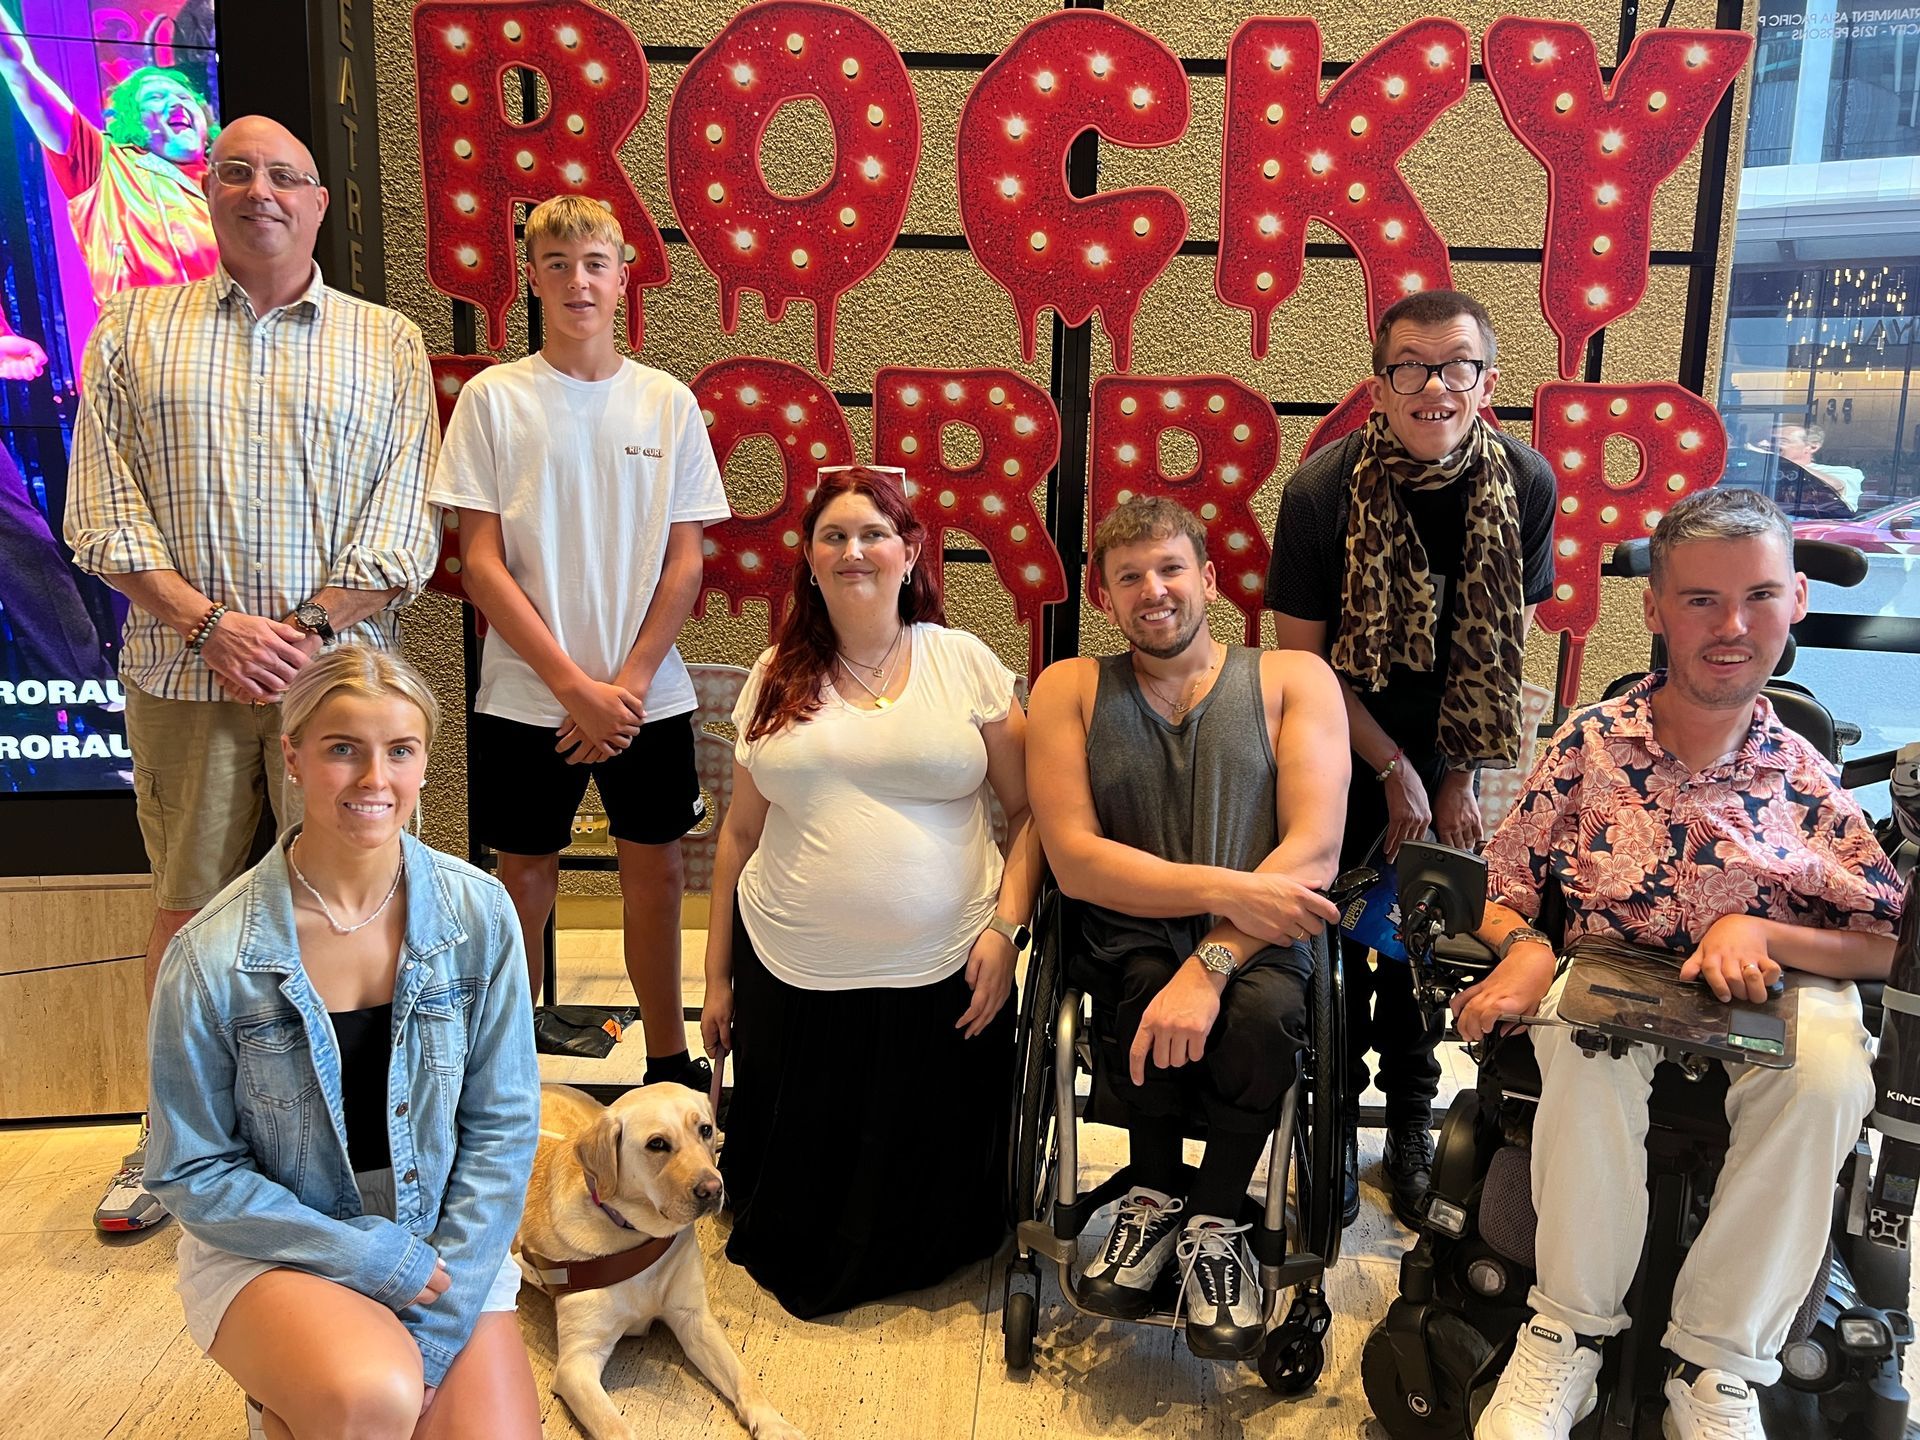 Dylan (middle) poses for a group photo with DAF recipients of varying disability in front of the red Rocky Horror sign that reads - Rocky Horror Show.